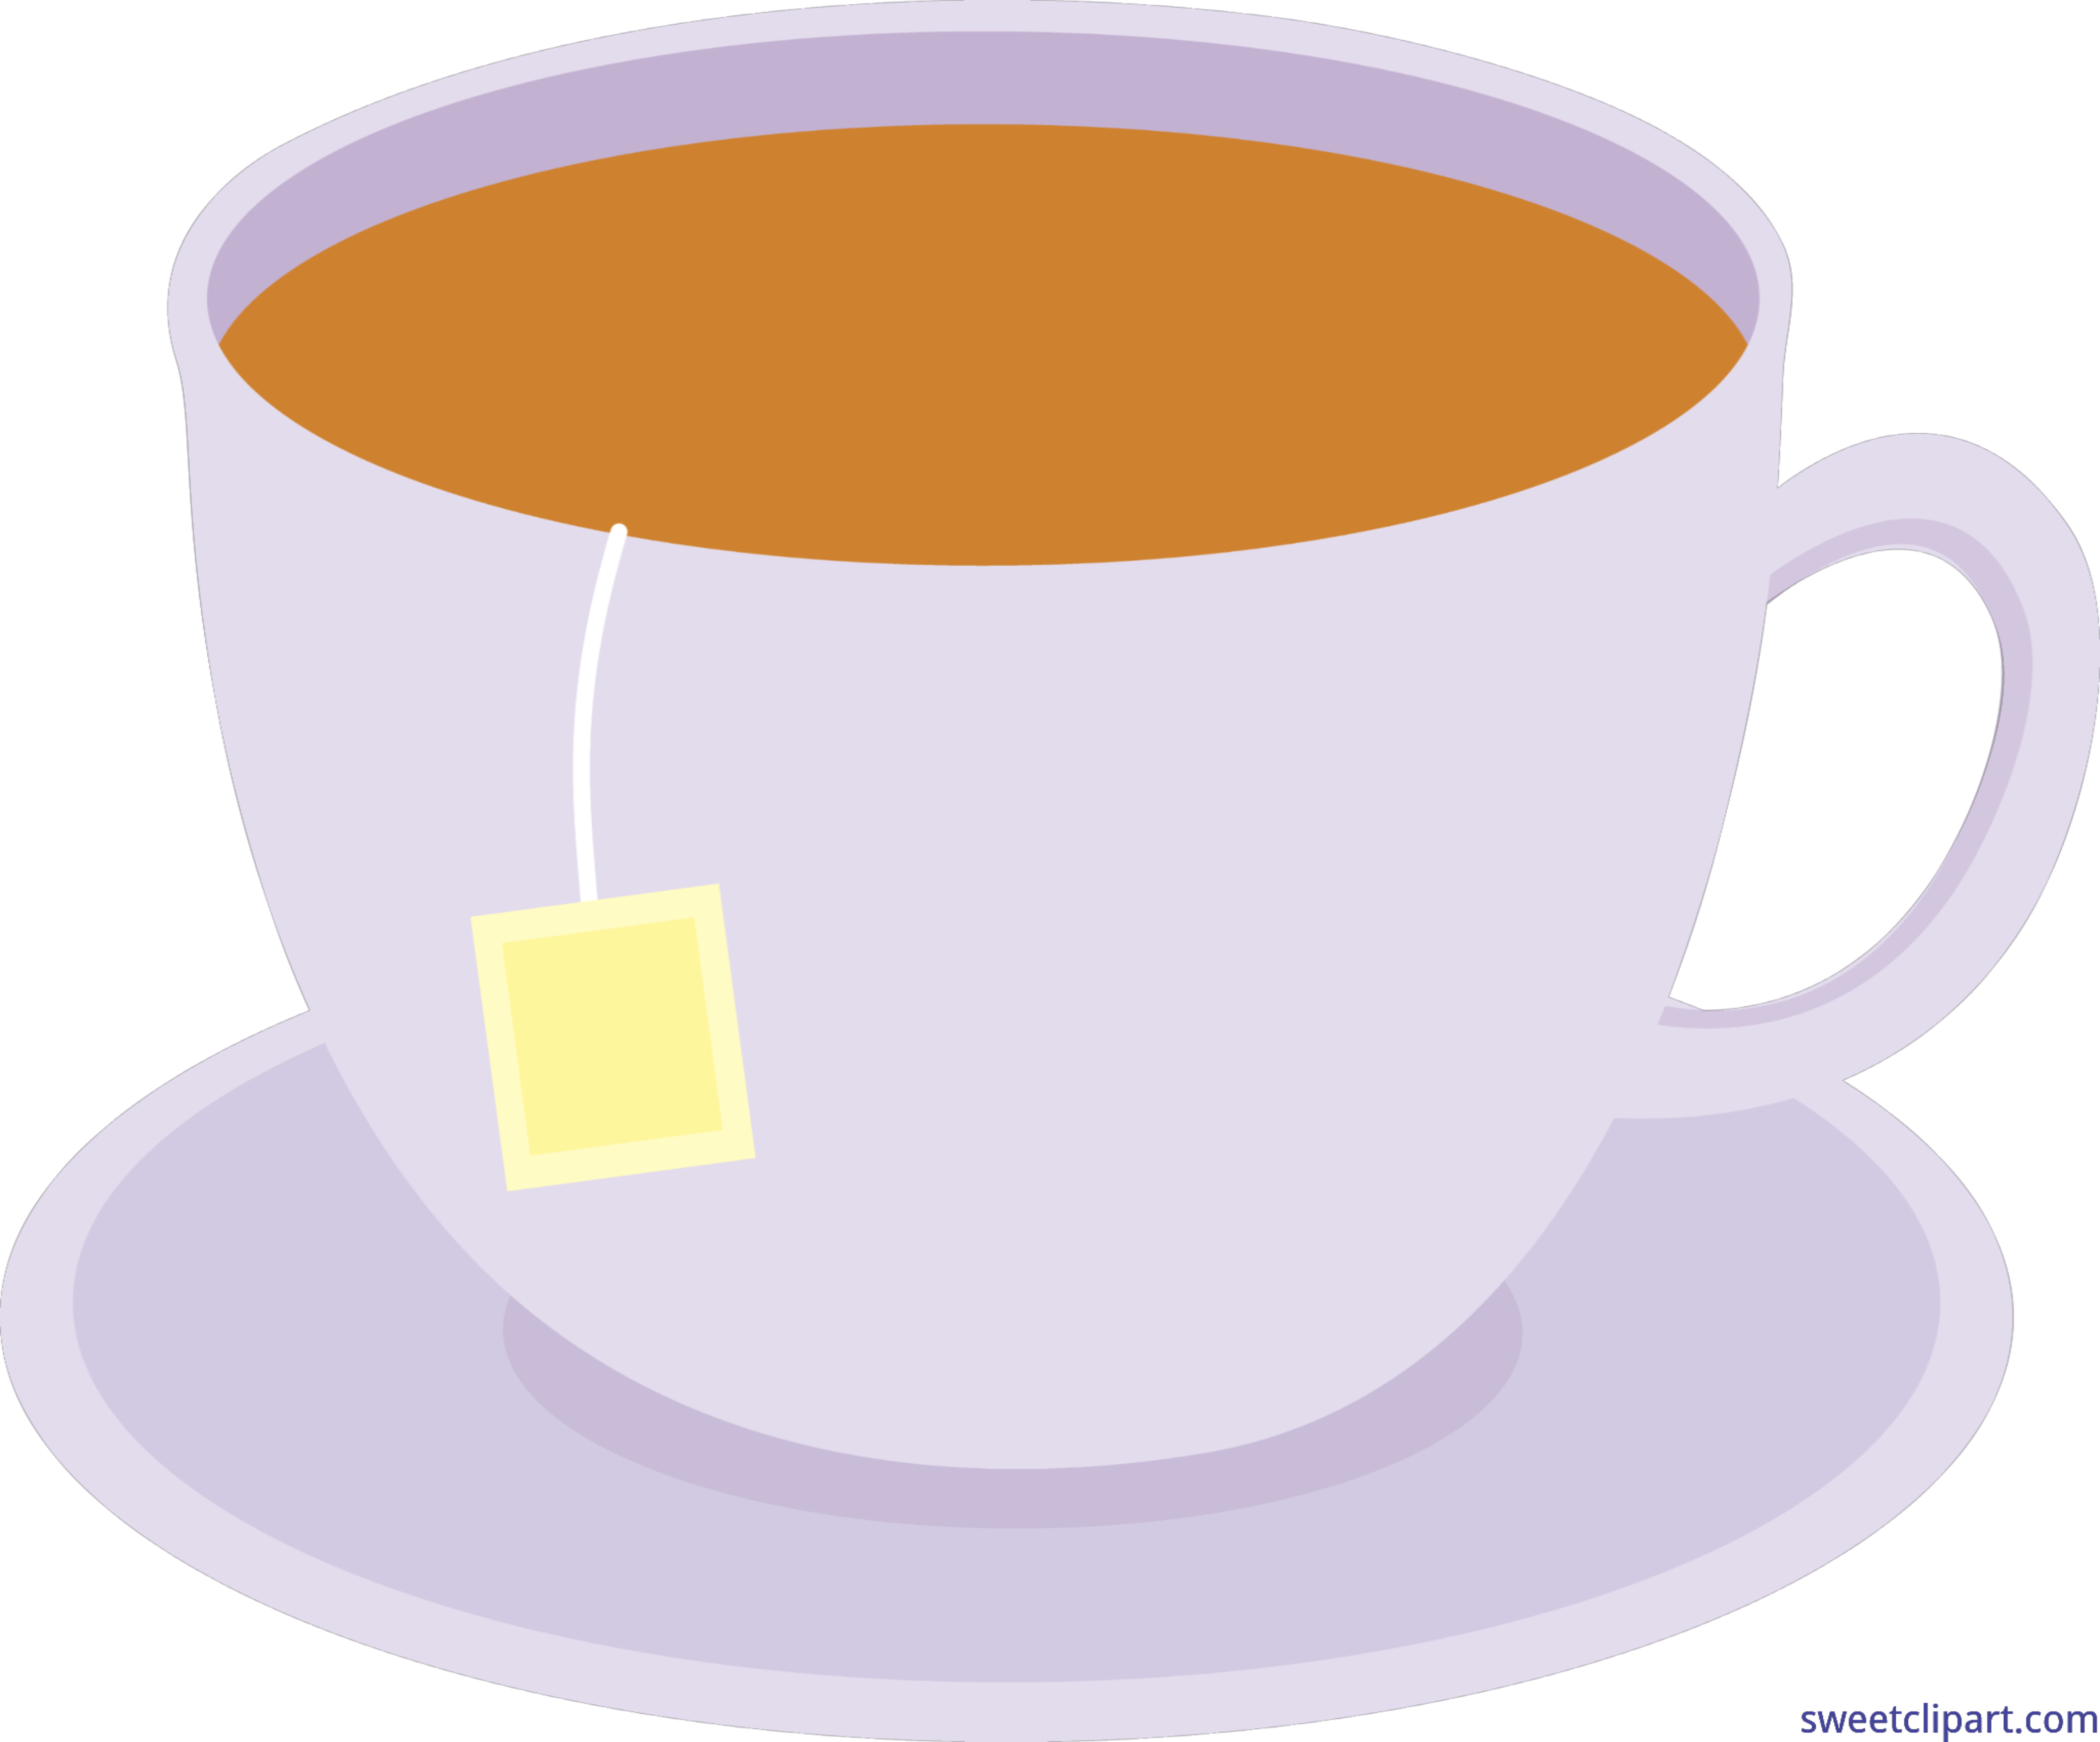 Cup Of Tea Clipart Clip Art Library